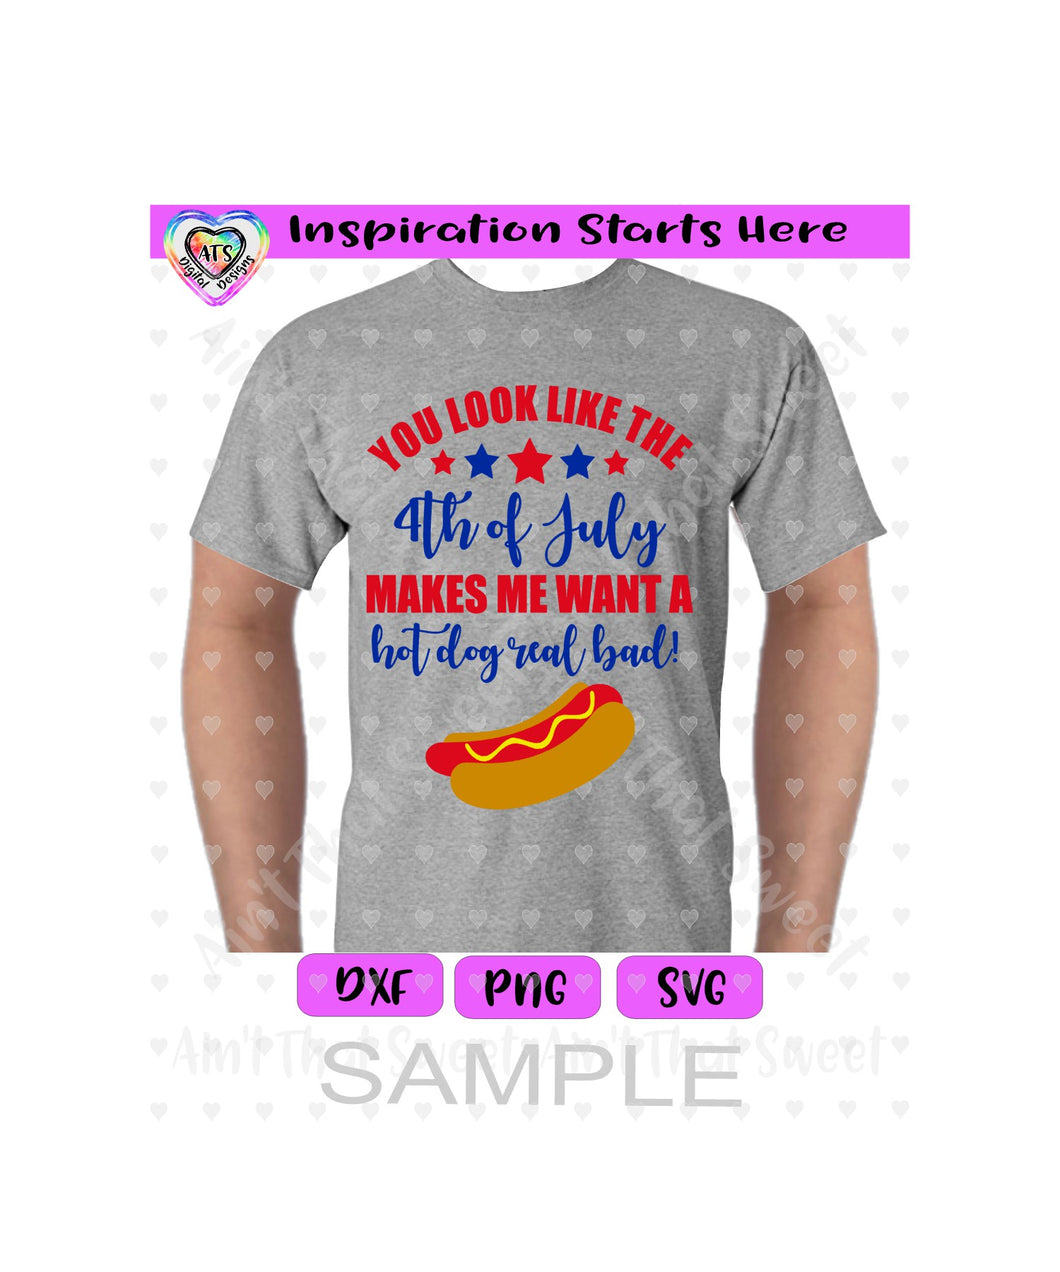 You Look Like The 4th Of July, Makes Me Want A Hot Dog Real Bad - Transparent PNG, SVG, DXF - Silhouette, Cricut, Scan N Cut